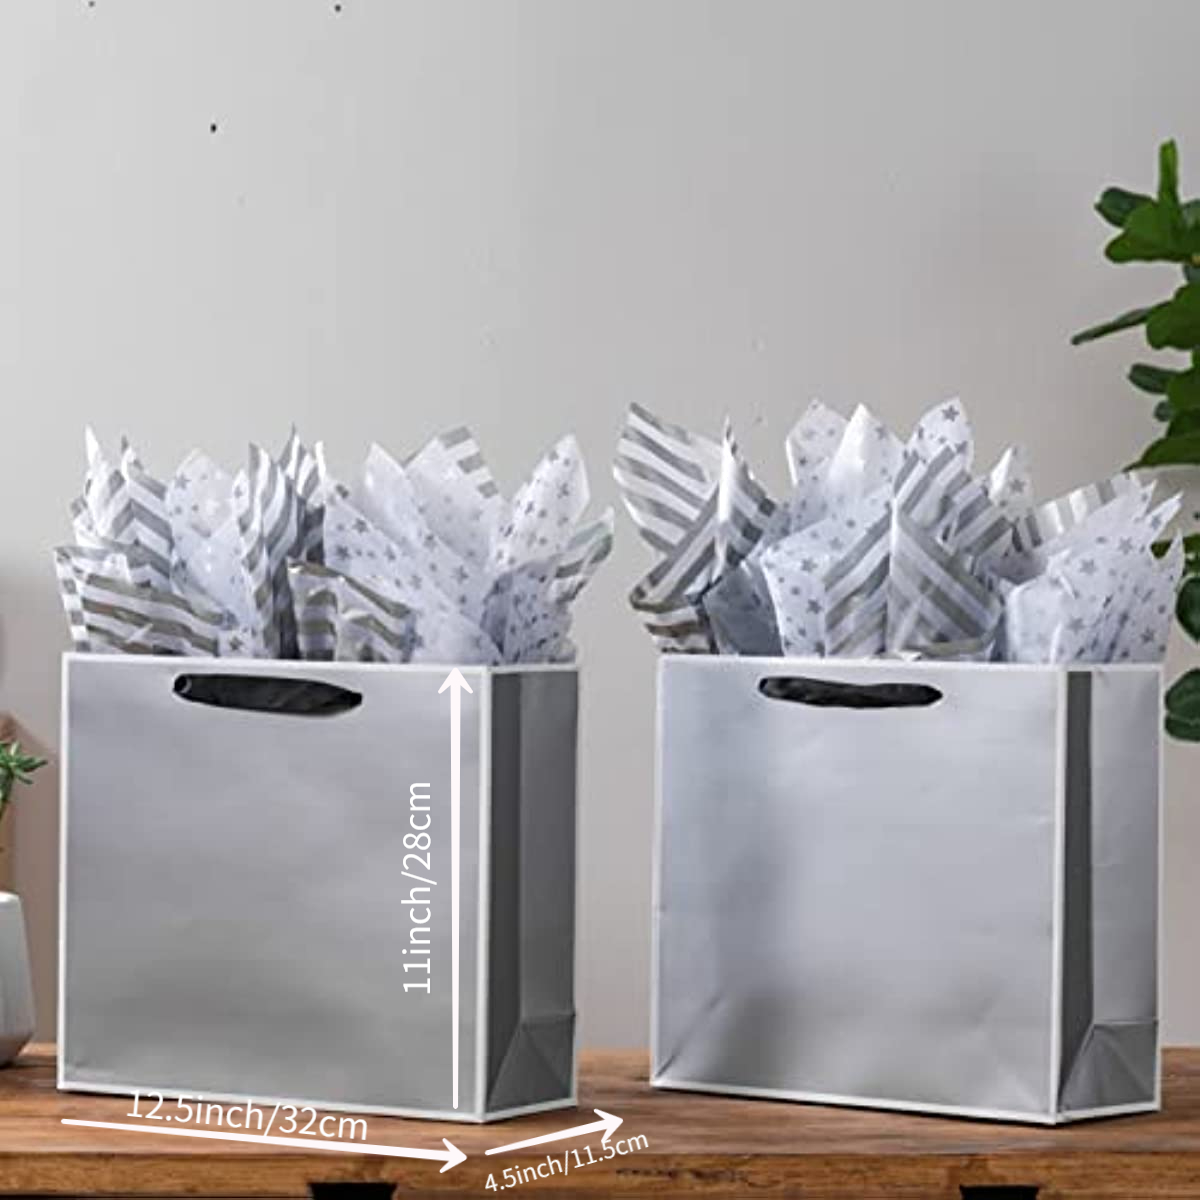 4) NEW Silver Chrome Paper Gift Bags W/ TISSUE PAPER & Tags Handles  10x8.5x4.5